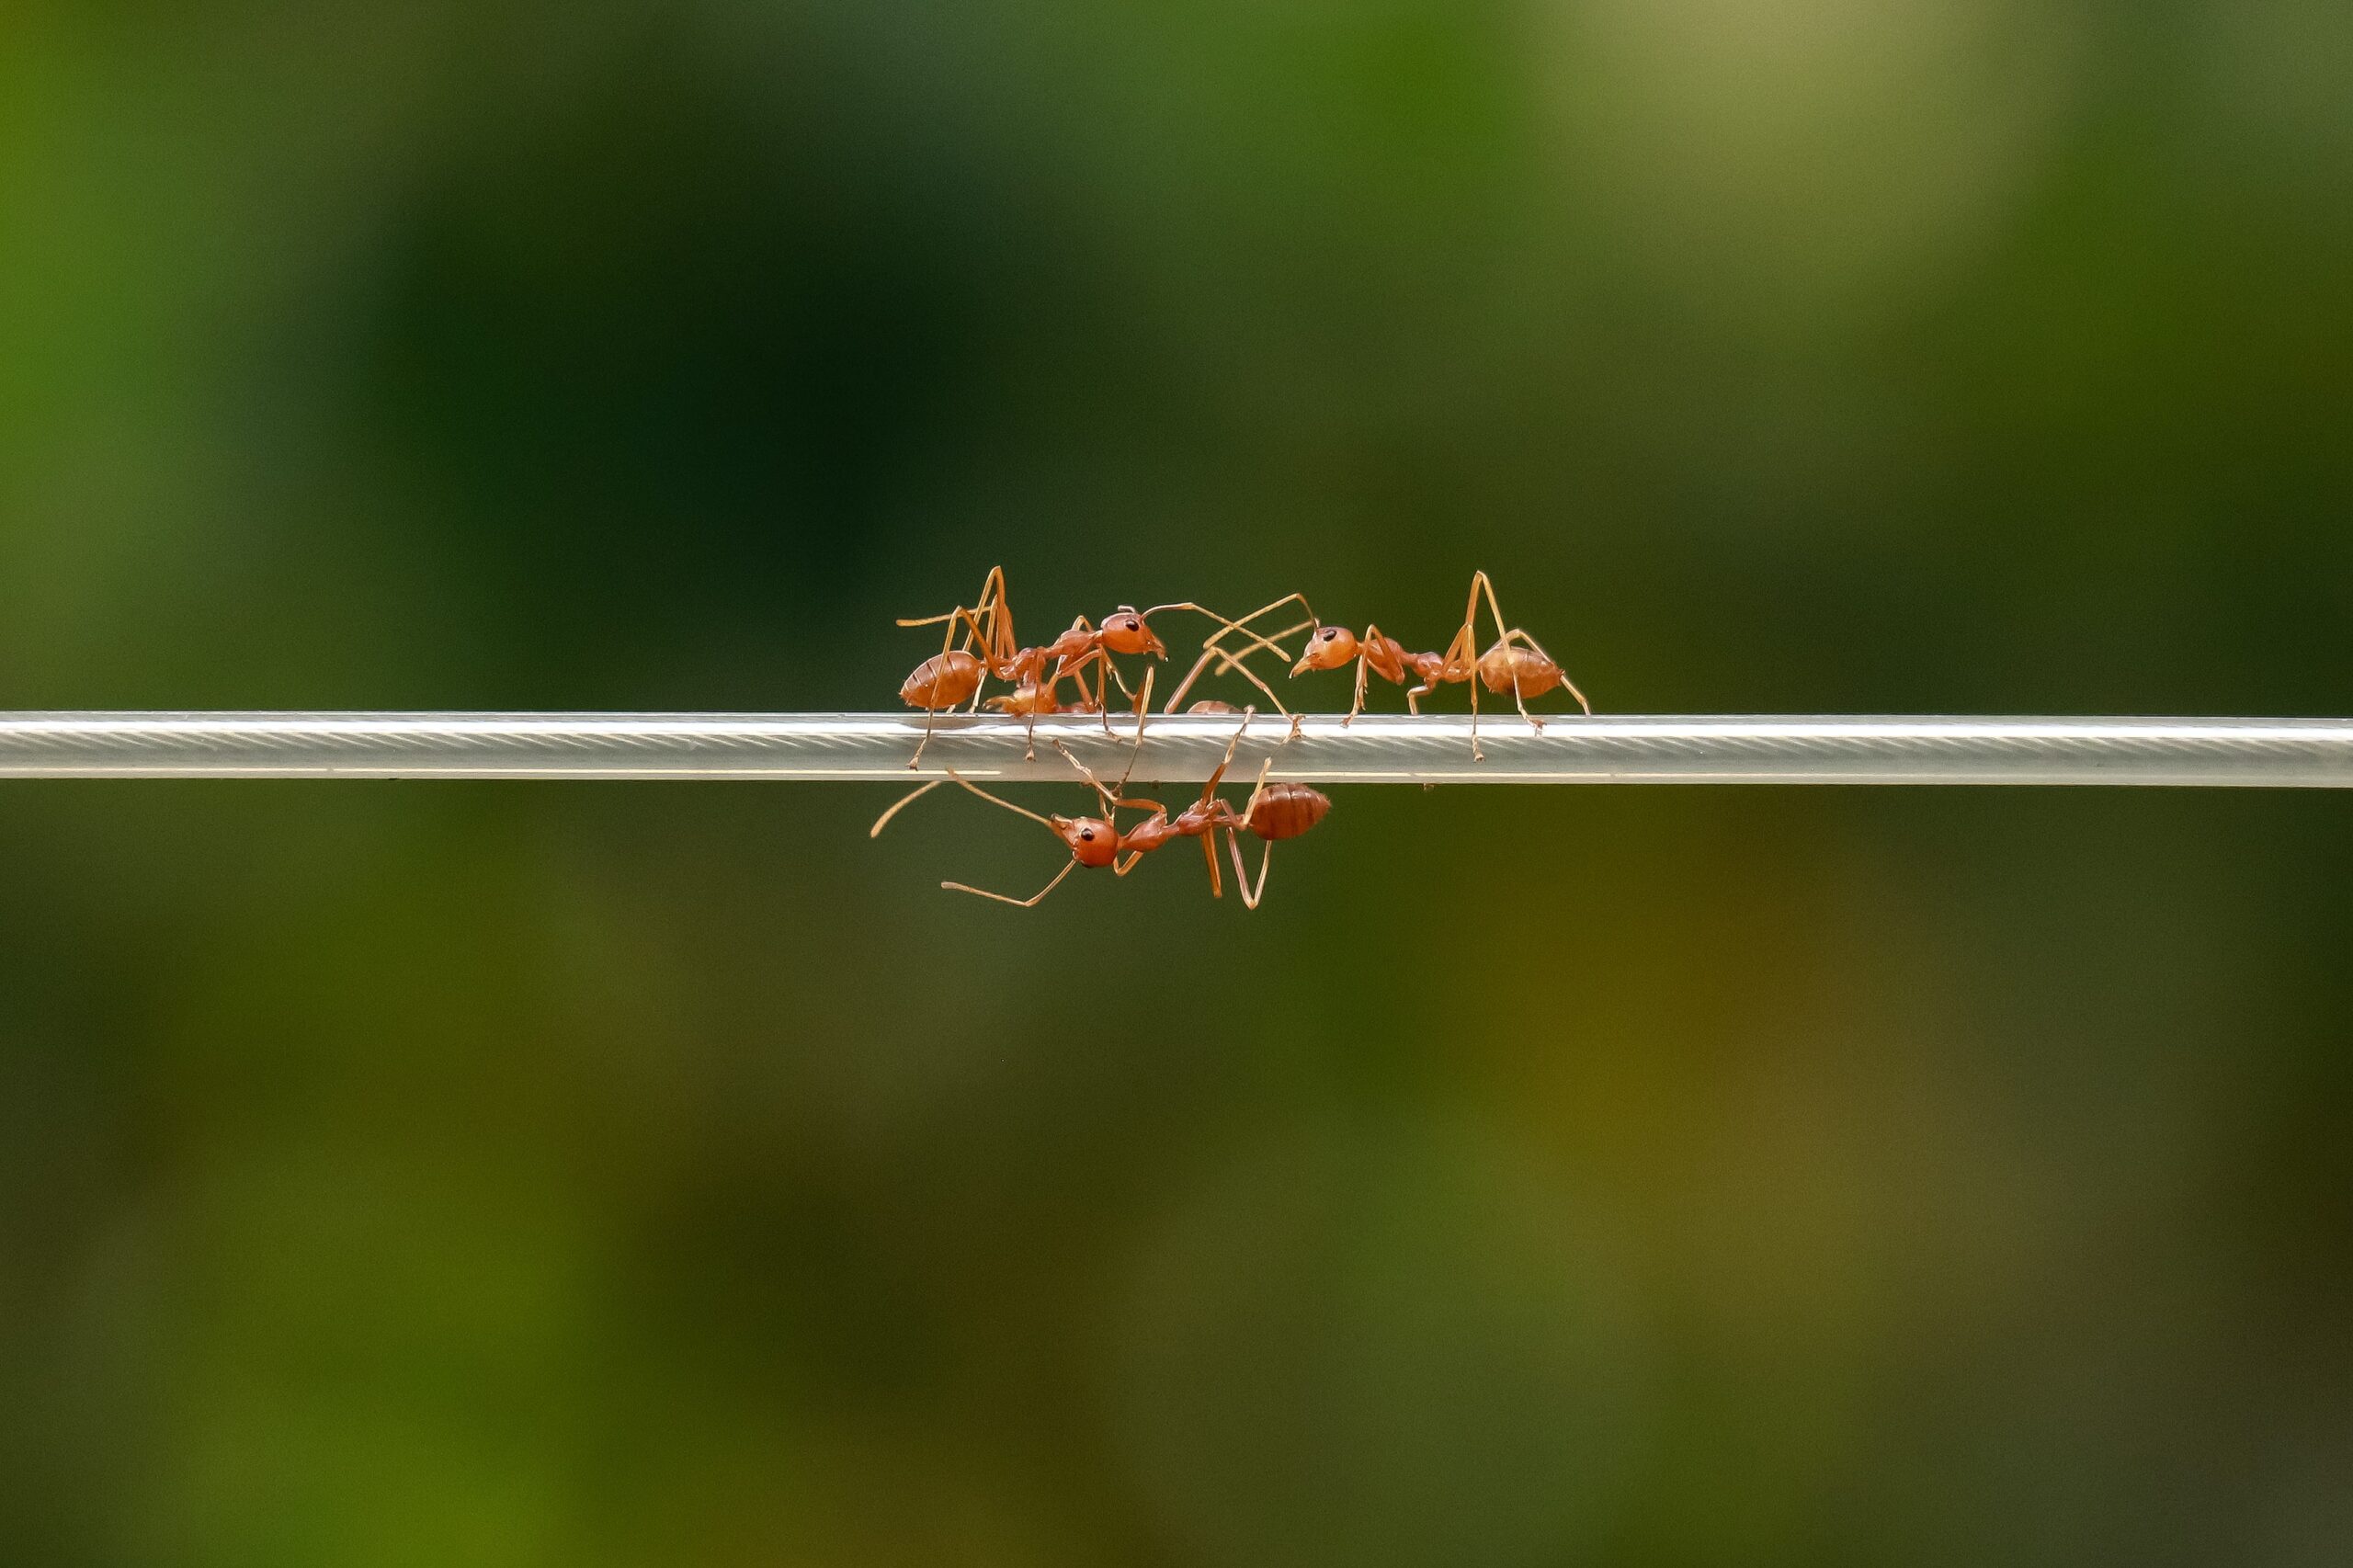 How Much Does an Ant Weigh?